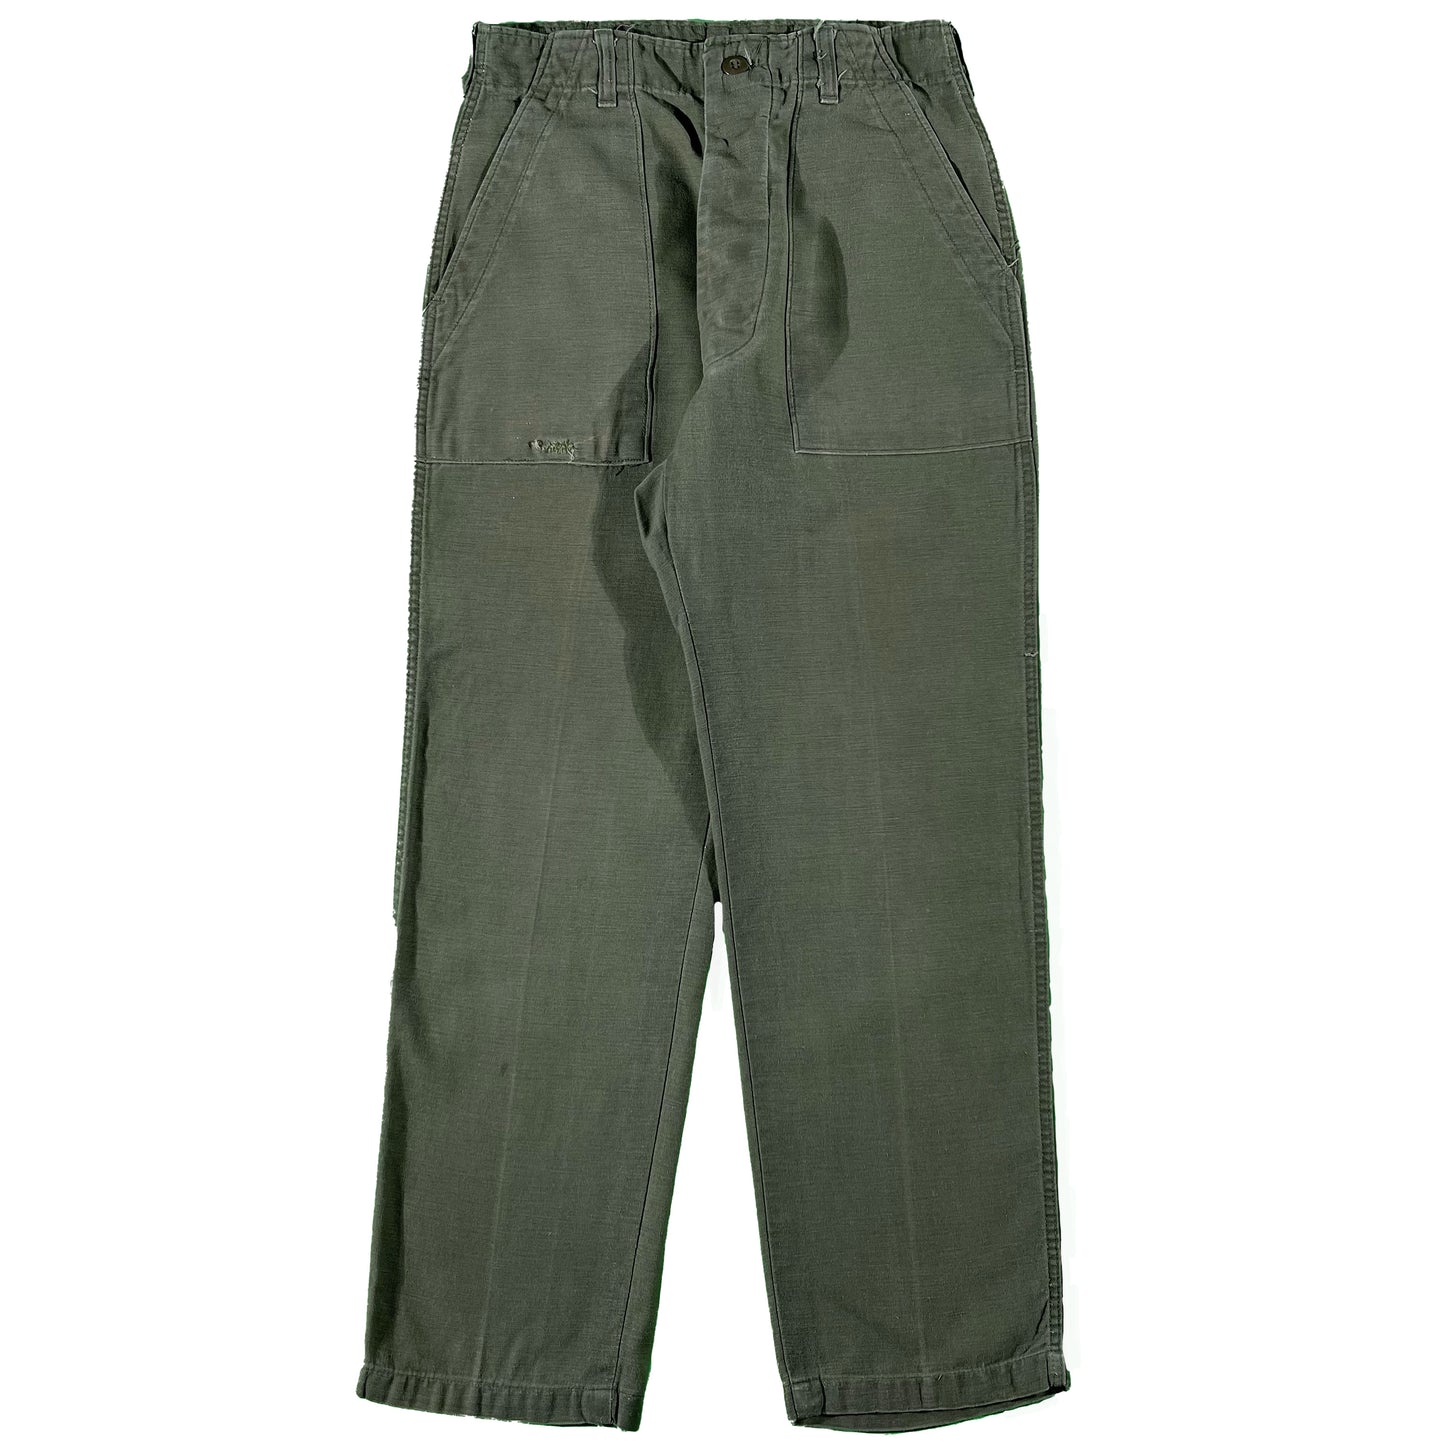 70s OG-107 Army Trousers- 27x28.5